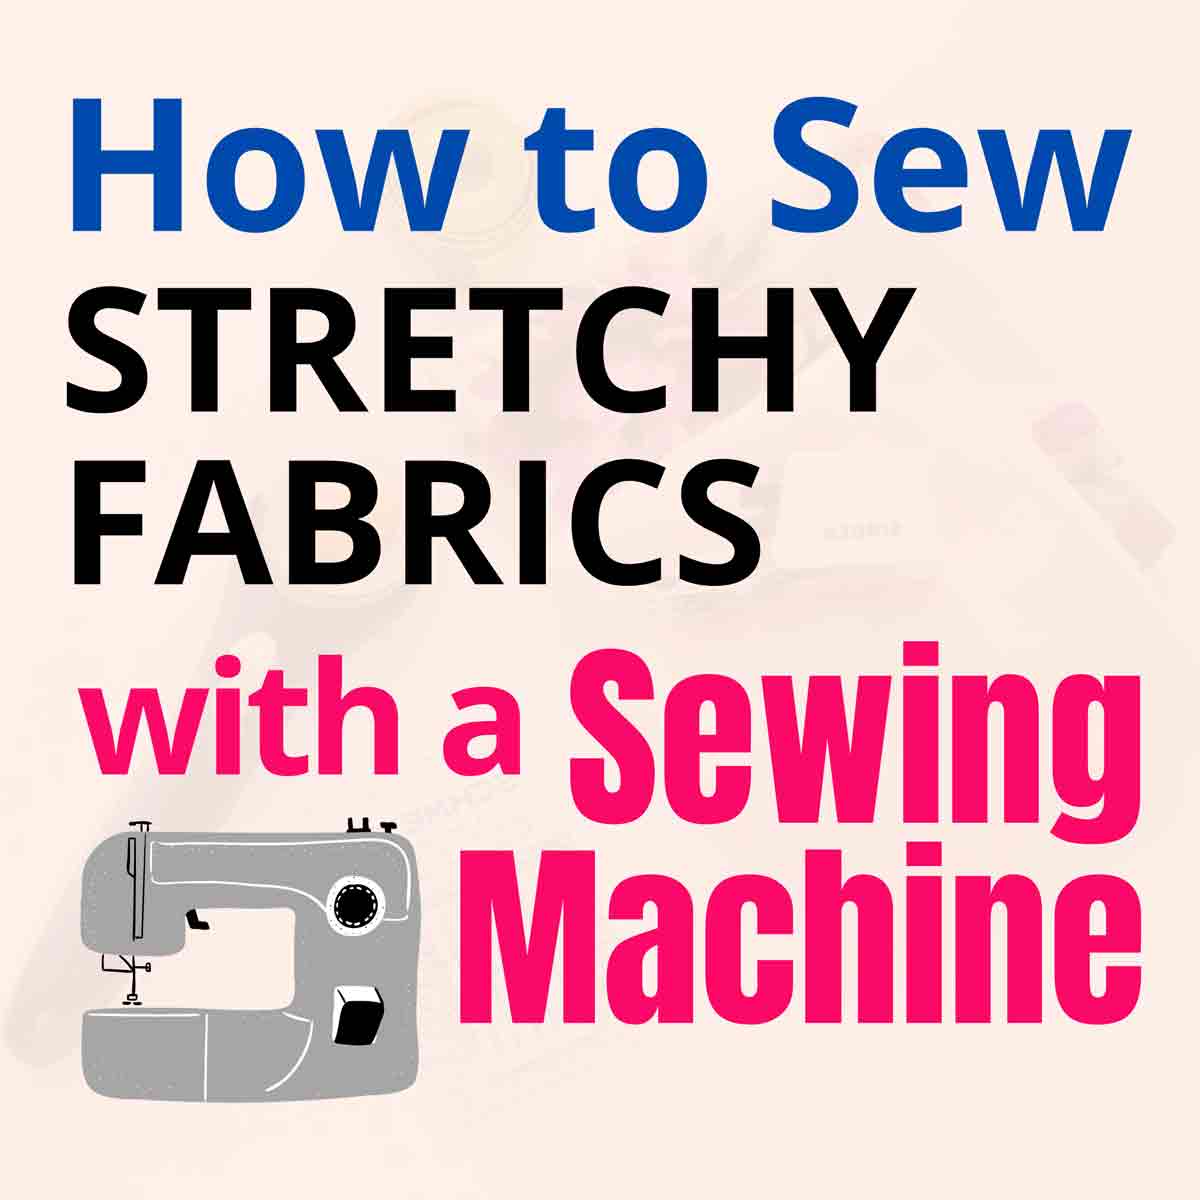 The 5 Best Tips for Sewing Knitted Elastic by Hand